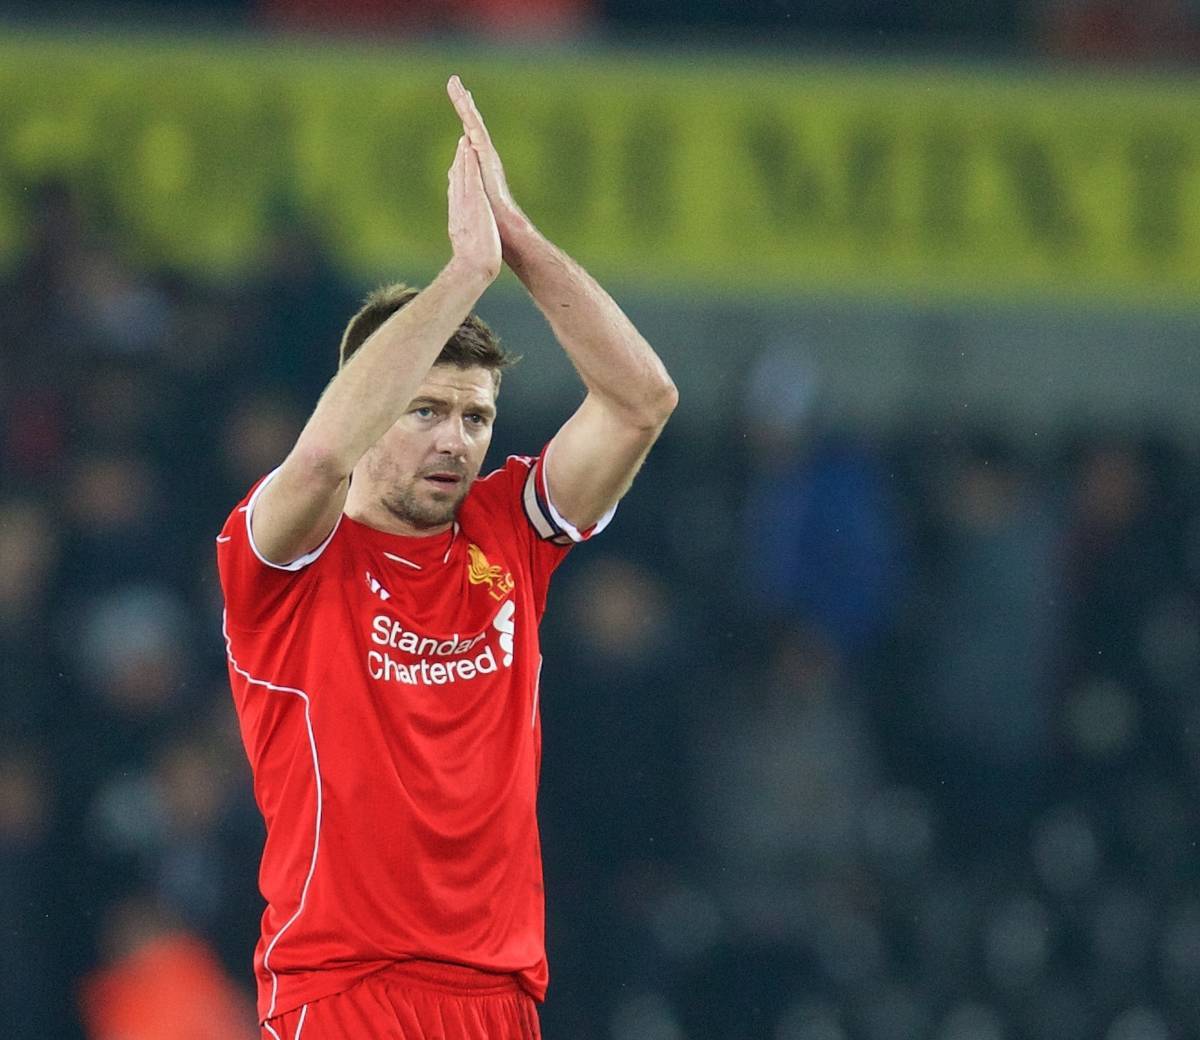 SWANSEA, ENGLAND - Monday, March 16, 2015: Liverpool's captain Steven Gerrard after the 1-0 victory over Swansea City during the Premier League match at the Liberty Stadium. (Pic by David Rawcliffe/Propaganda)